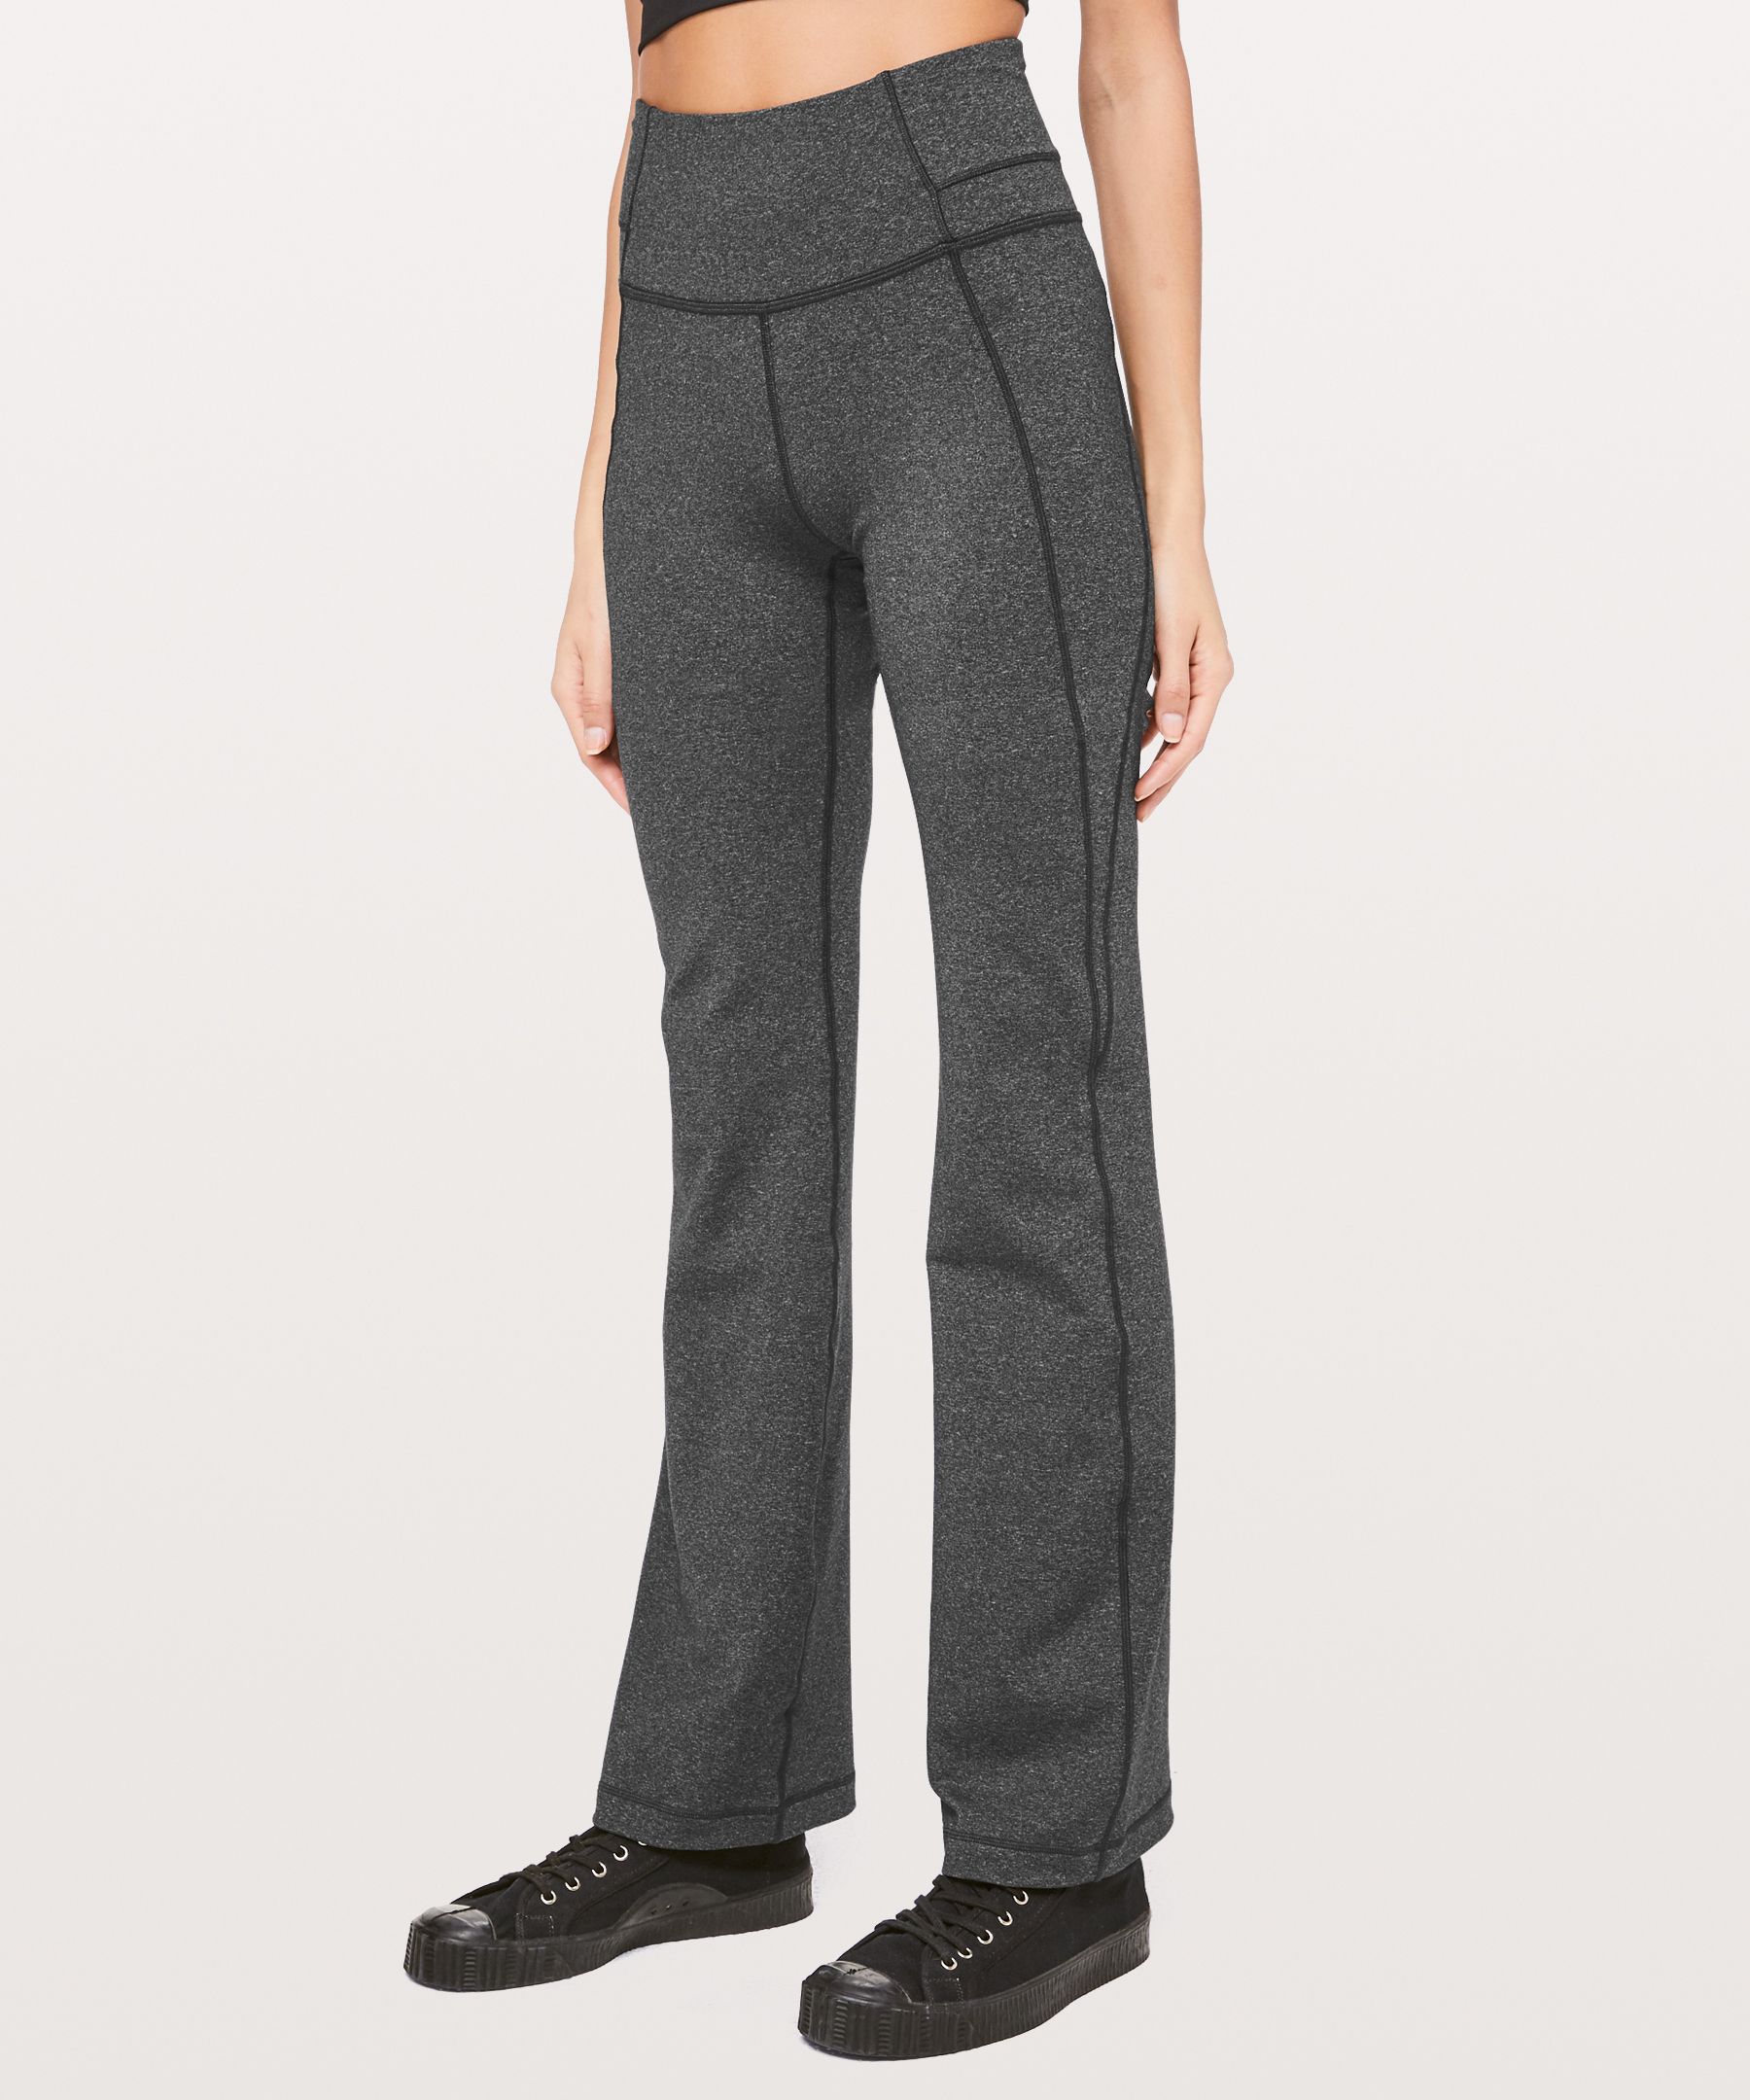 groove pant bootcut